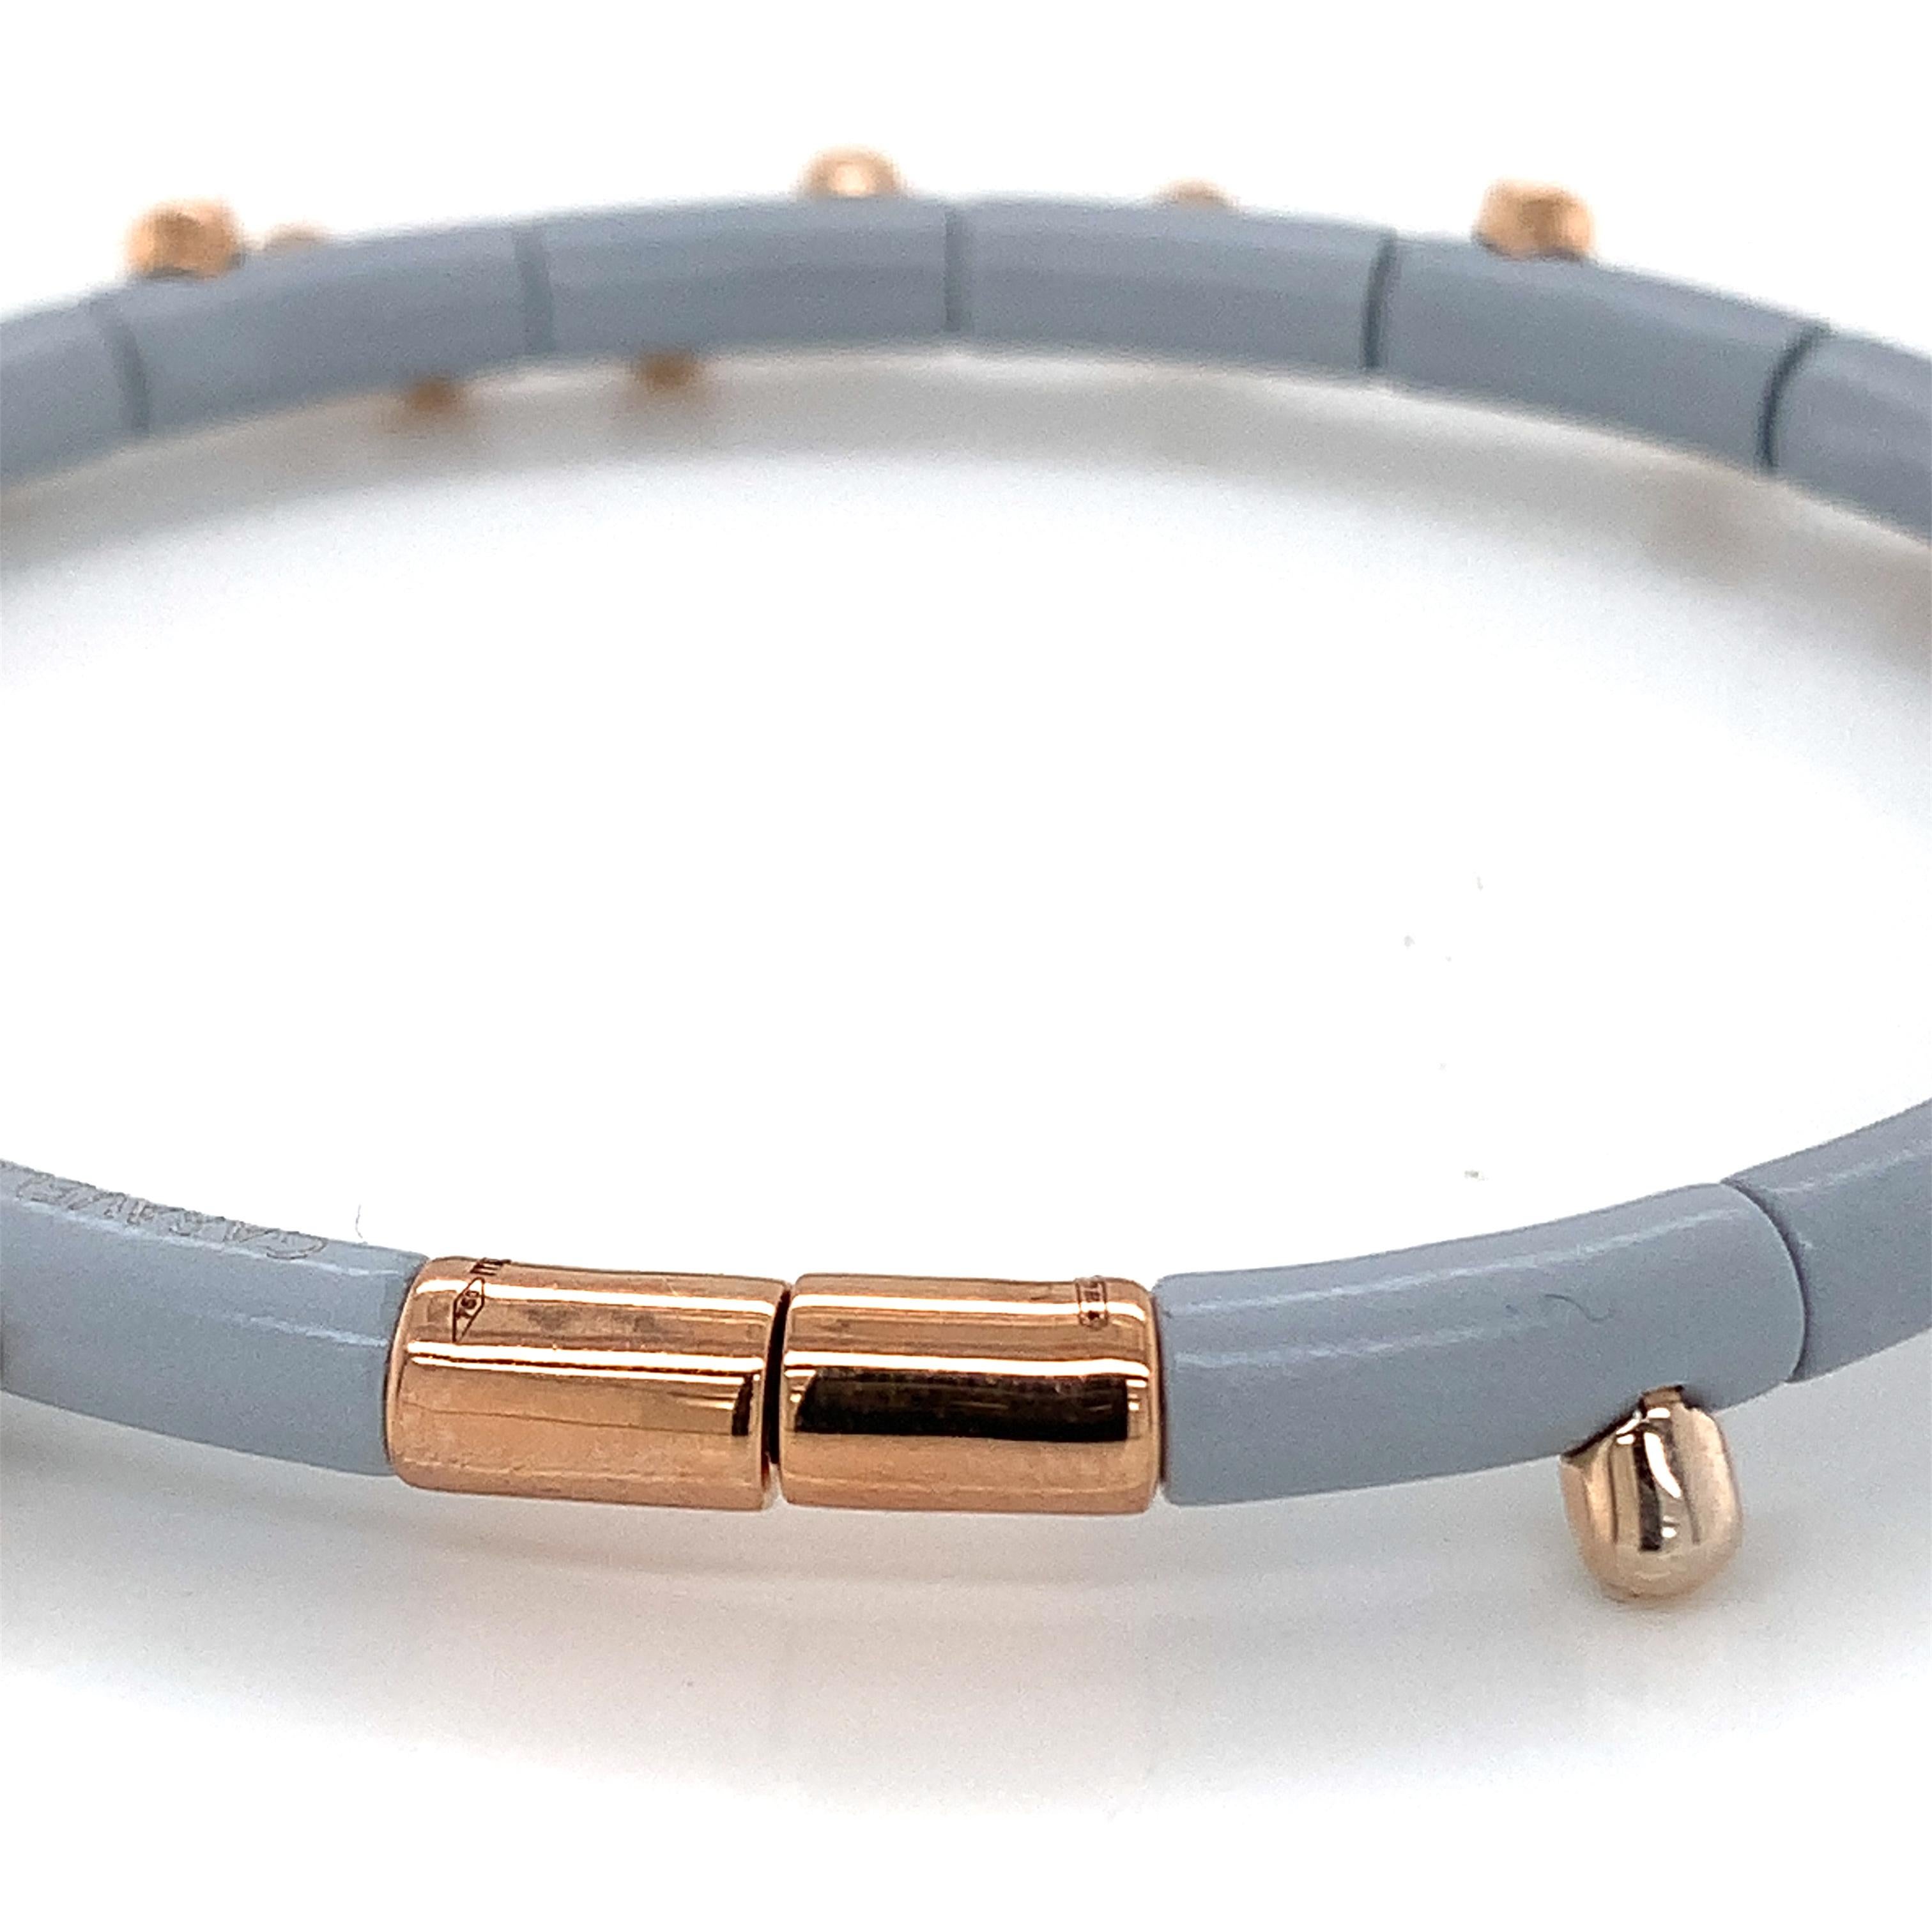 A sophisticated style crafted with luxurious attention to detail, our Grey Cactus Bracelet is the perfect accessory for any aesthetic.
Boasting a timeless combination of pearl grey aluminum and rose gold elements, this flexible bracelet is